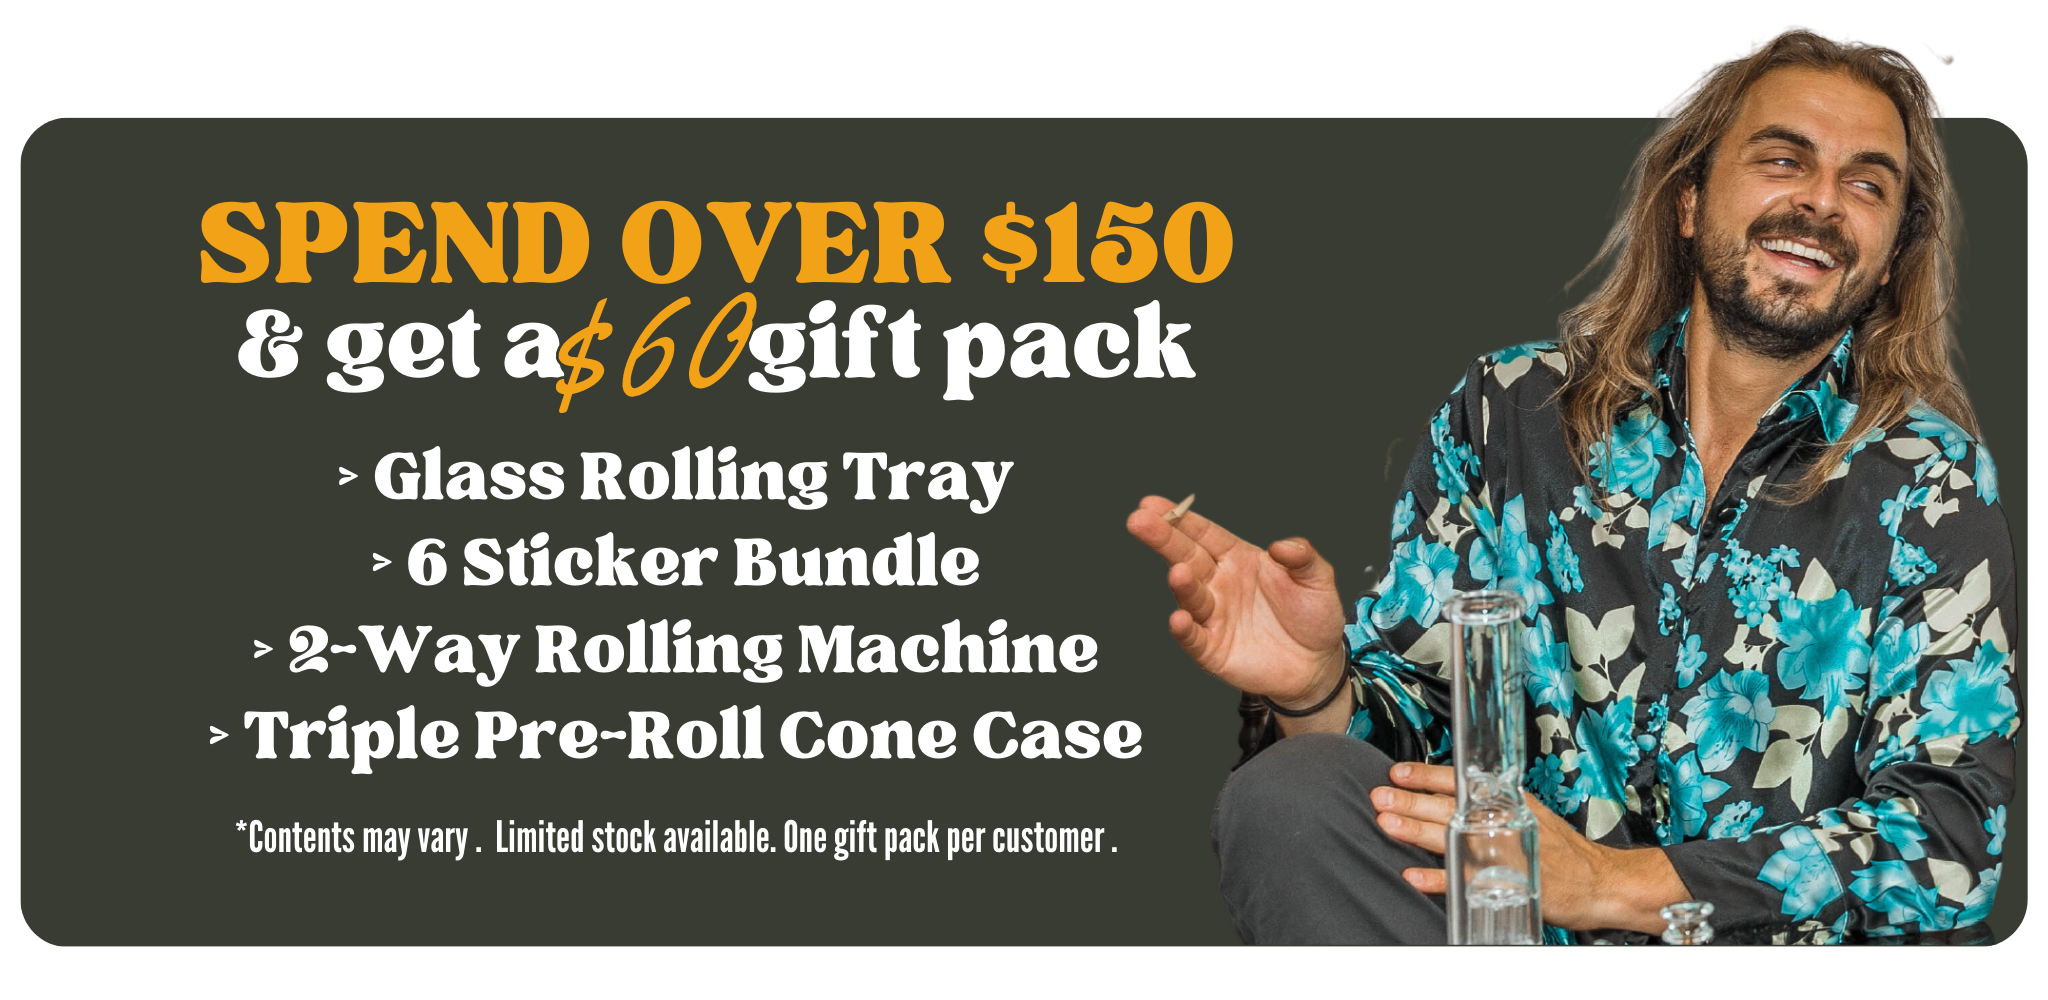 420 Sale Get A Free $60 Gift Pack When You Spend Over $150